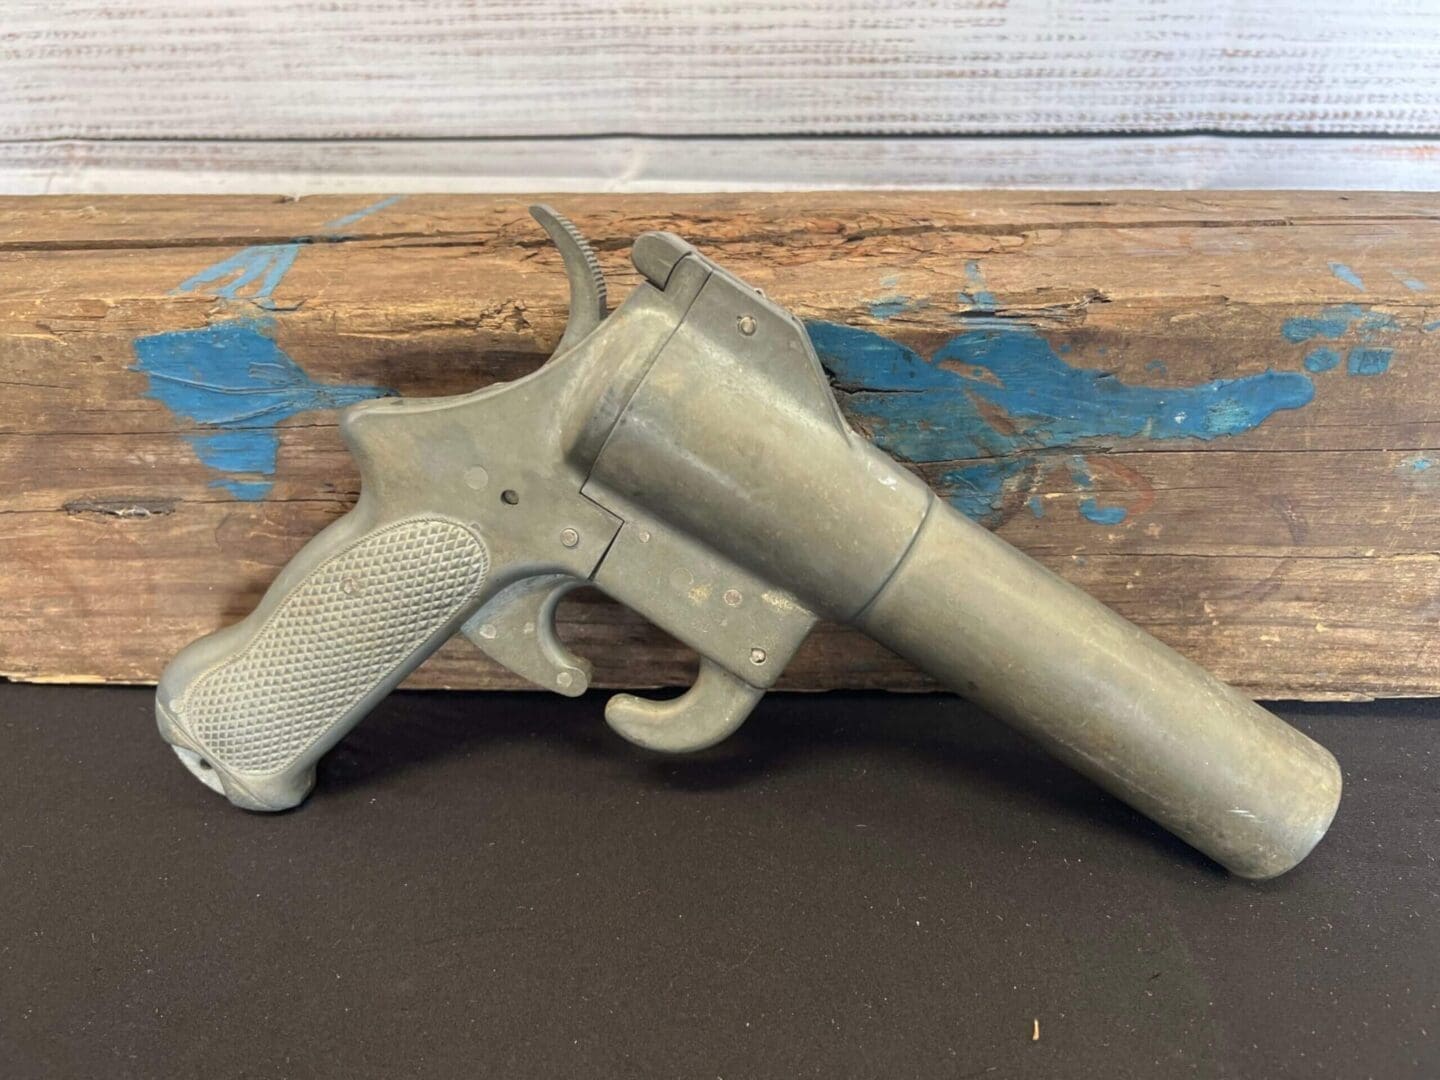 A Flare gun #3 sitting on top of a piece of wood.